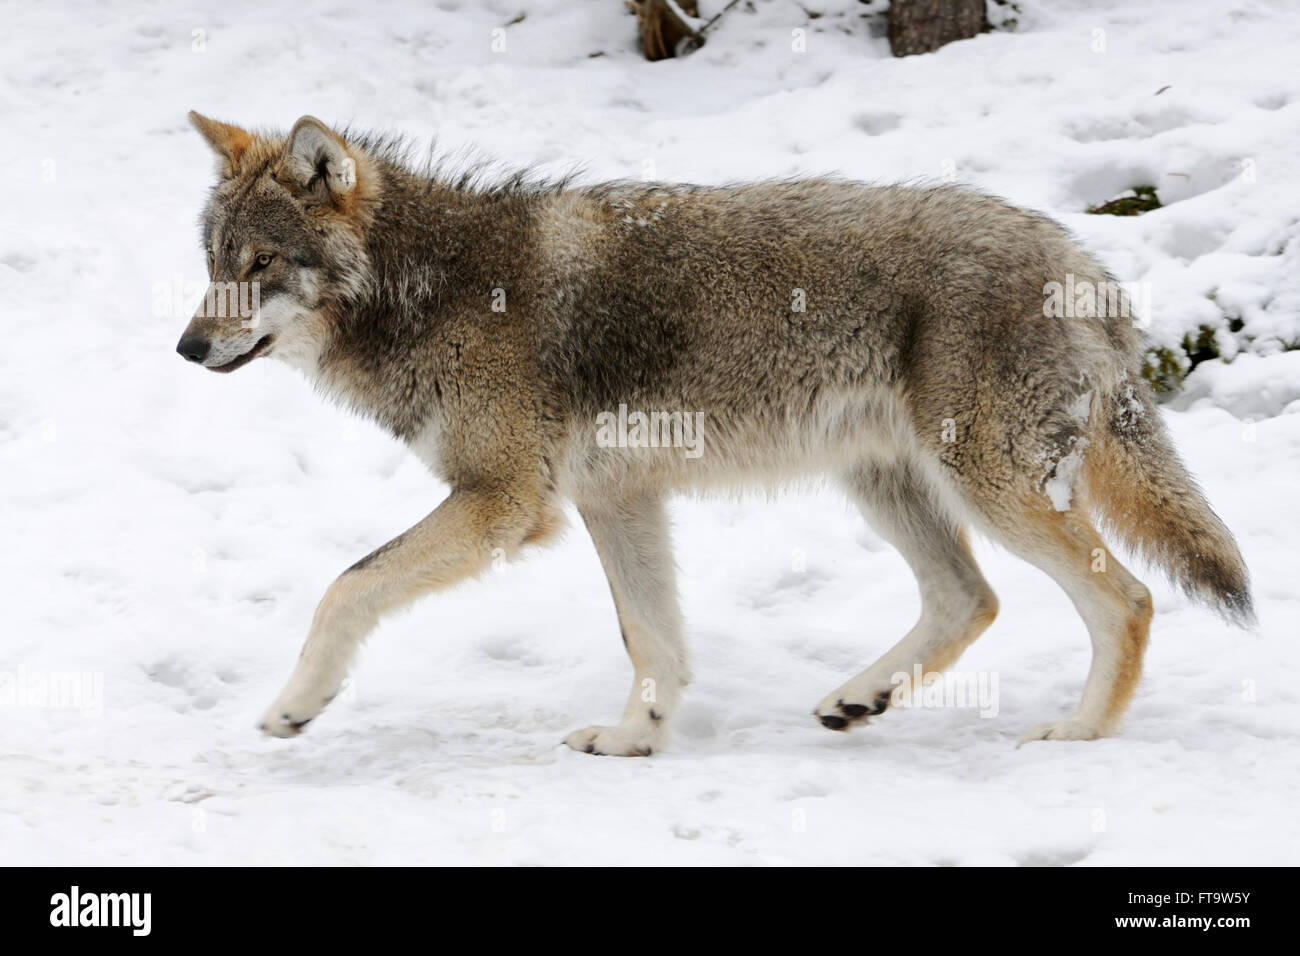 Eurasian Wolf / Grey Wolf ( Canis lupus ) in winter fur, presenting typical distinguishing features in snow covered environment. Stock Photo